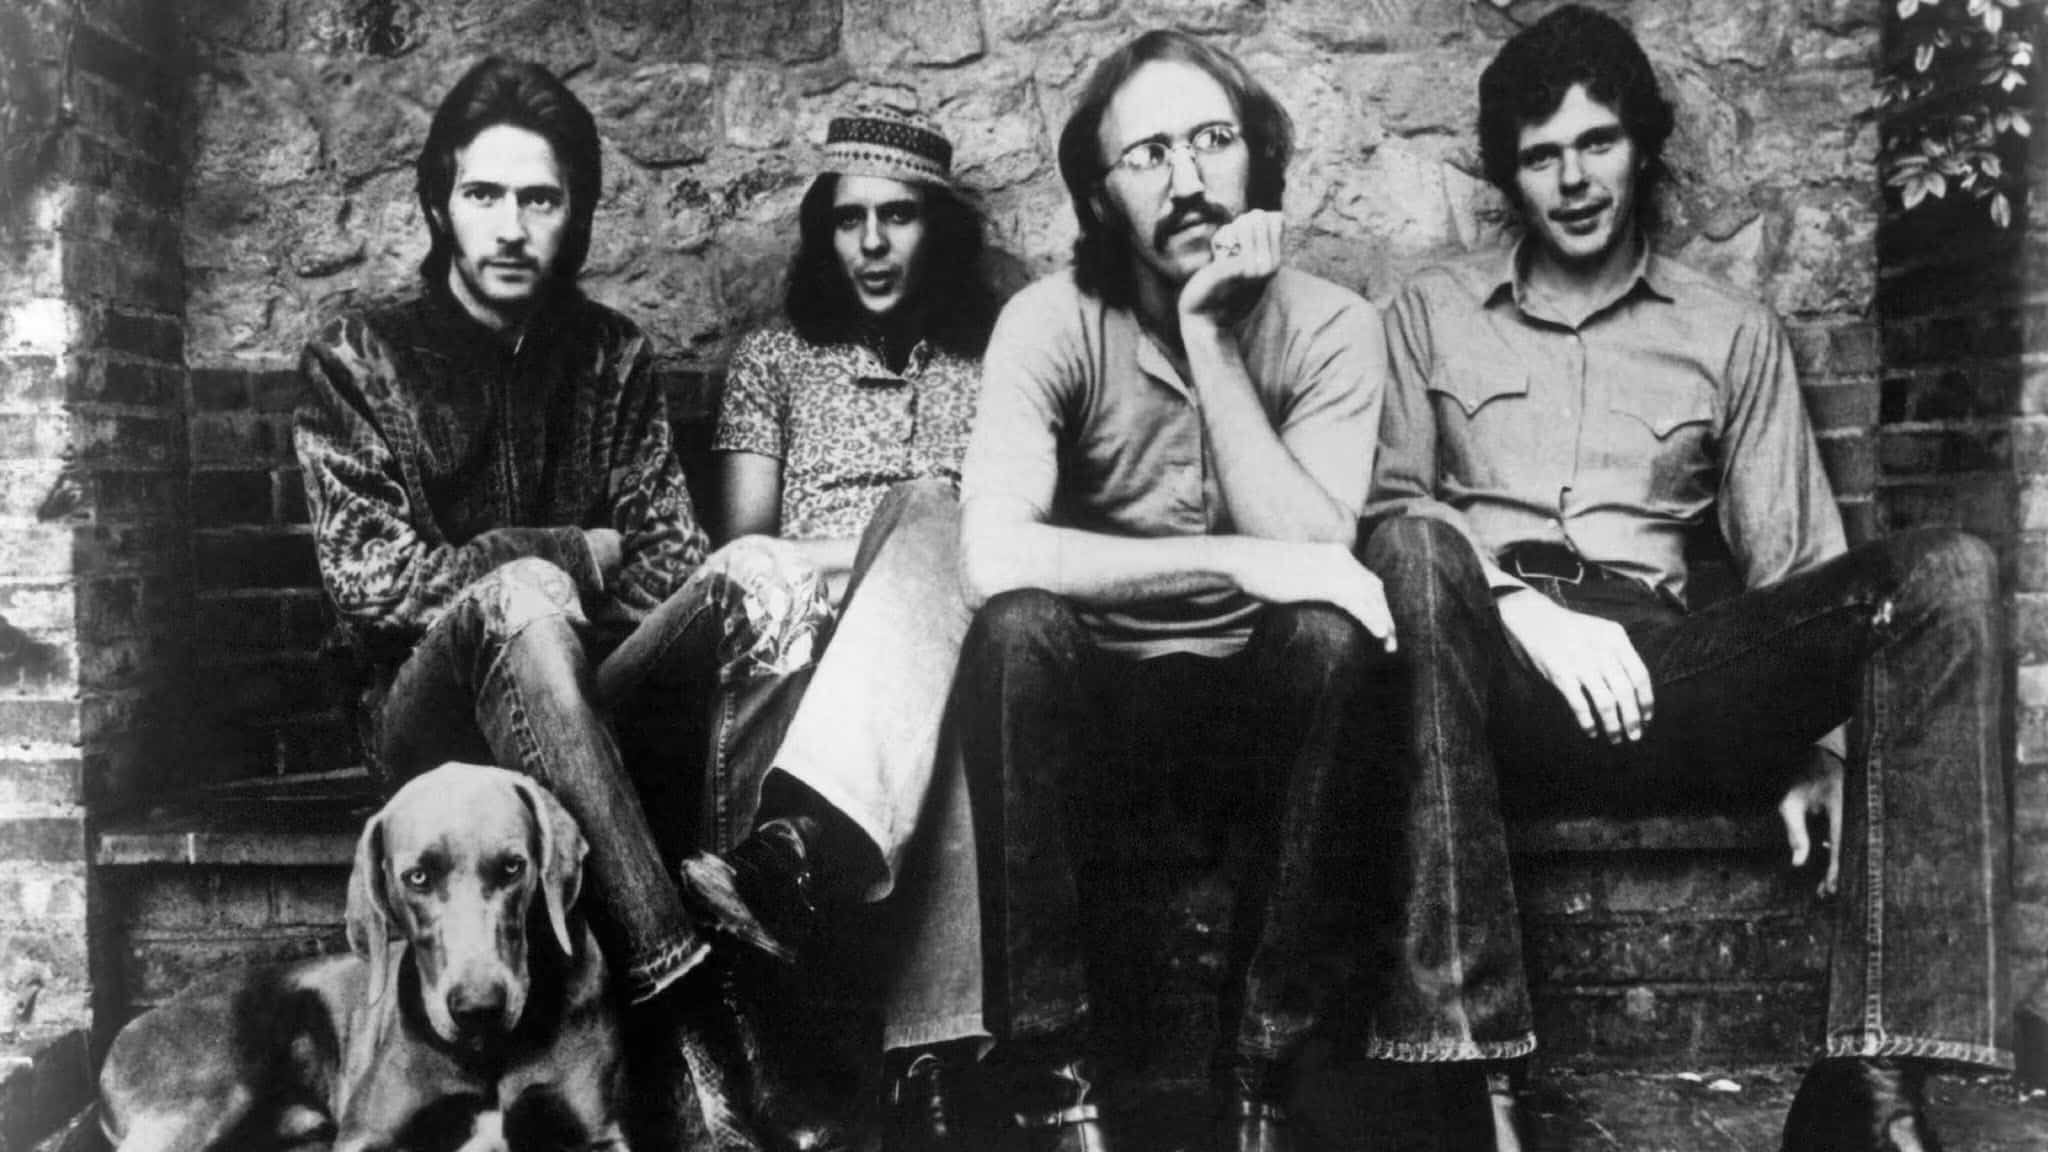 10 Best Derek And The Dominoes In Concert Songs Of All Time